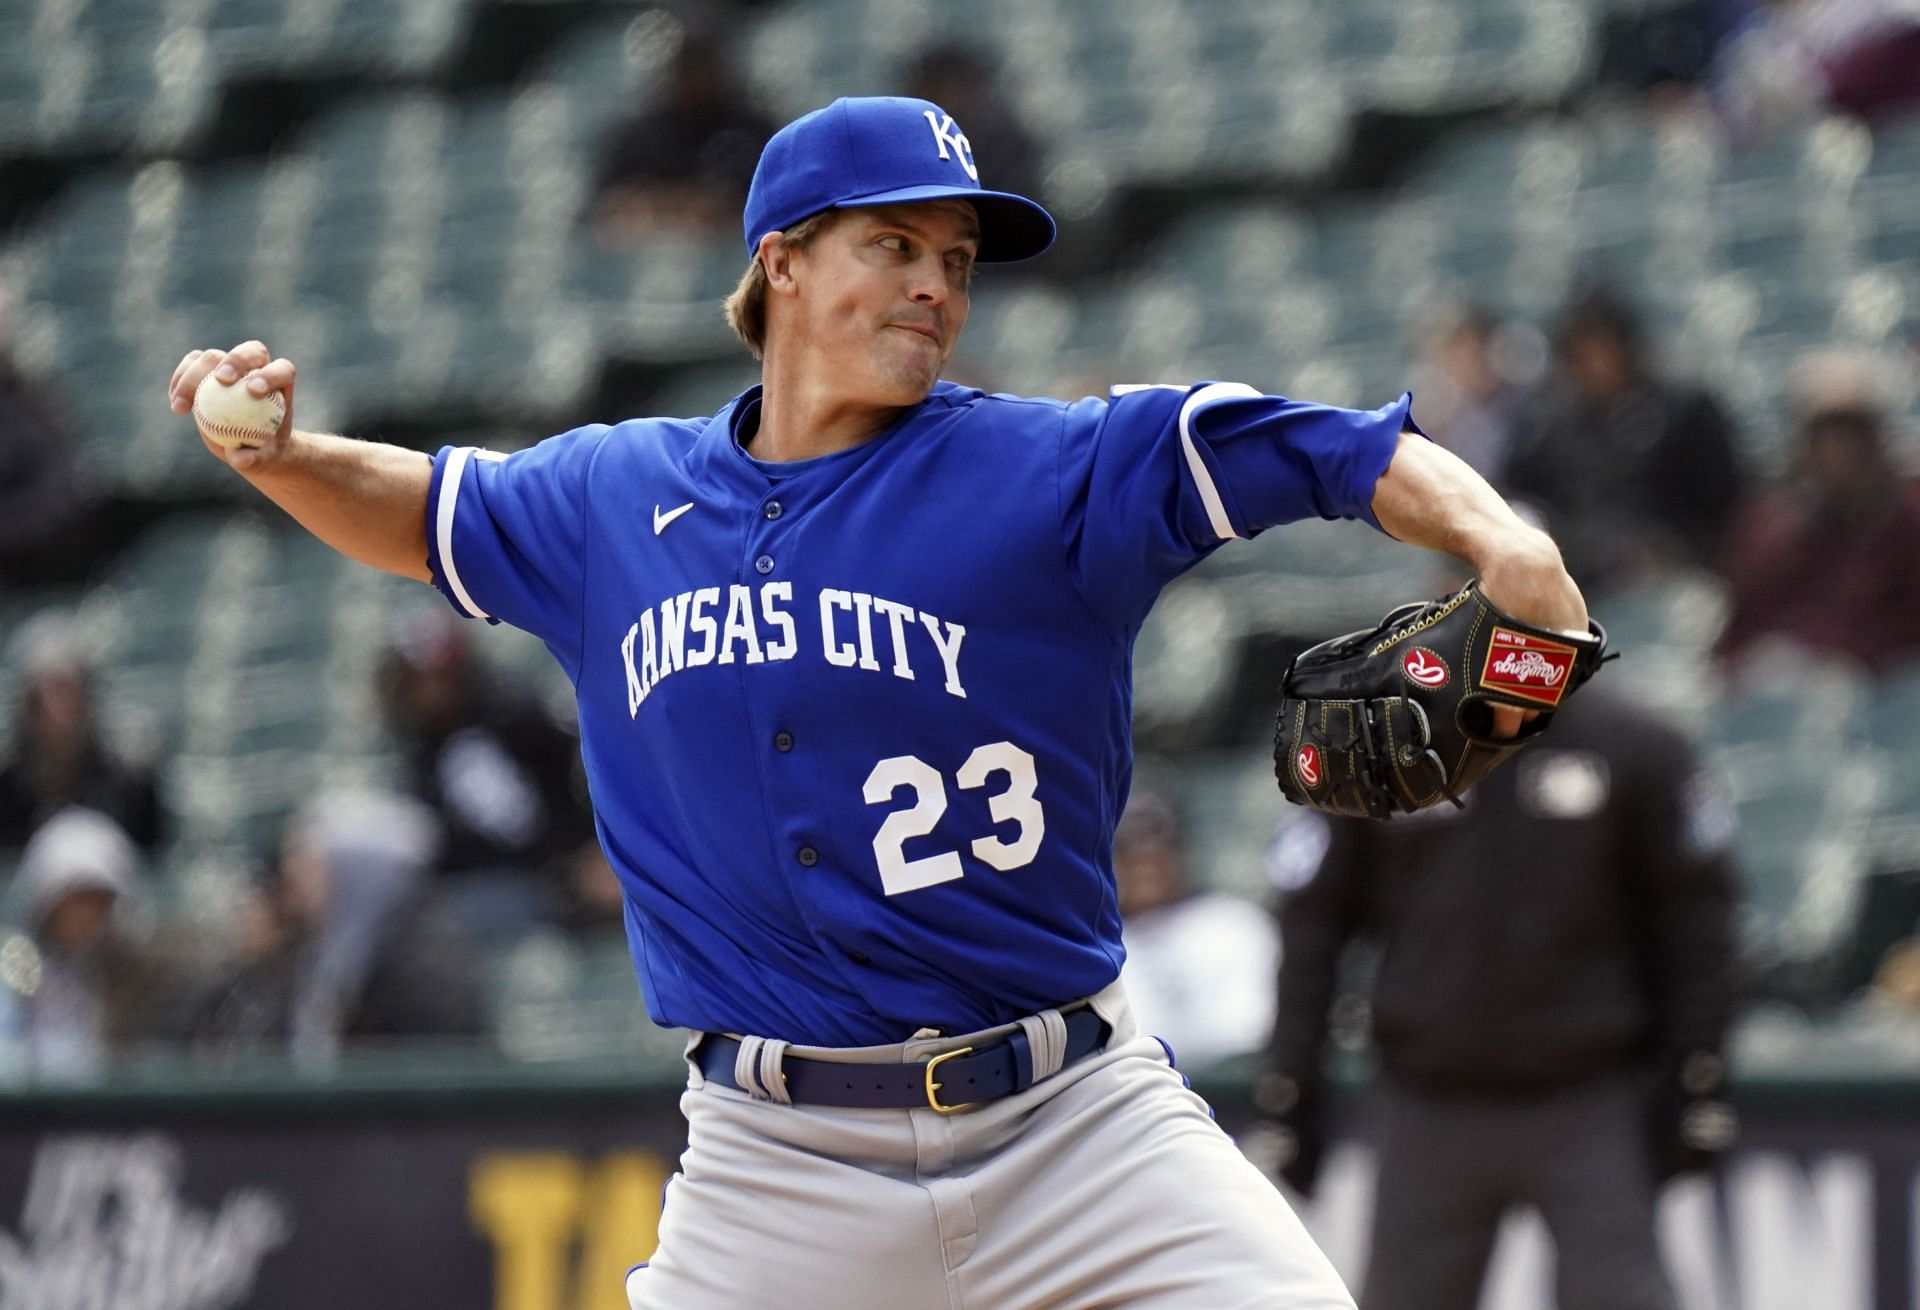 Zack Greinke pitches during a Kansas City Royals v Chicago White Sox game earlier this season.